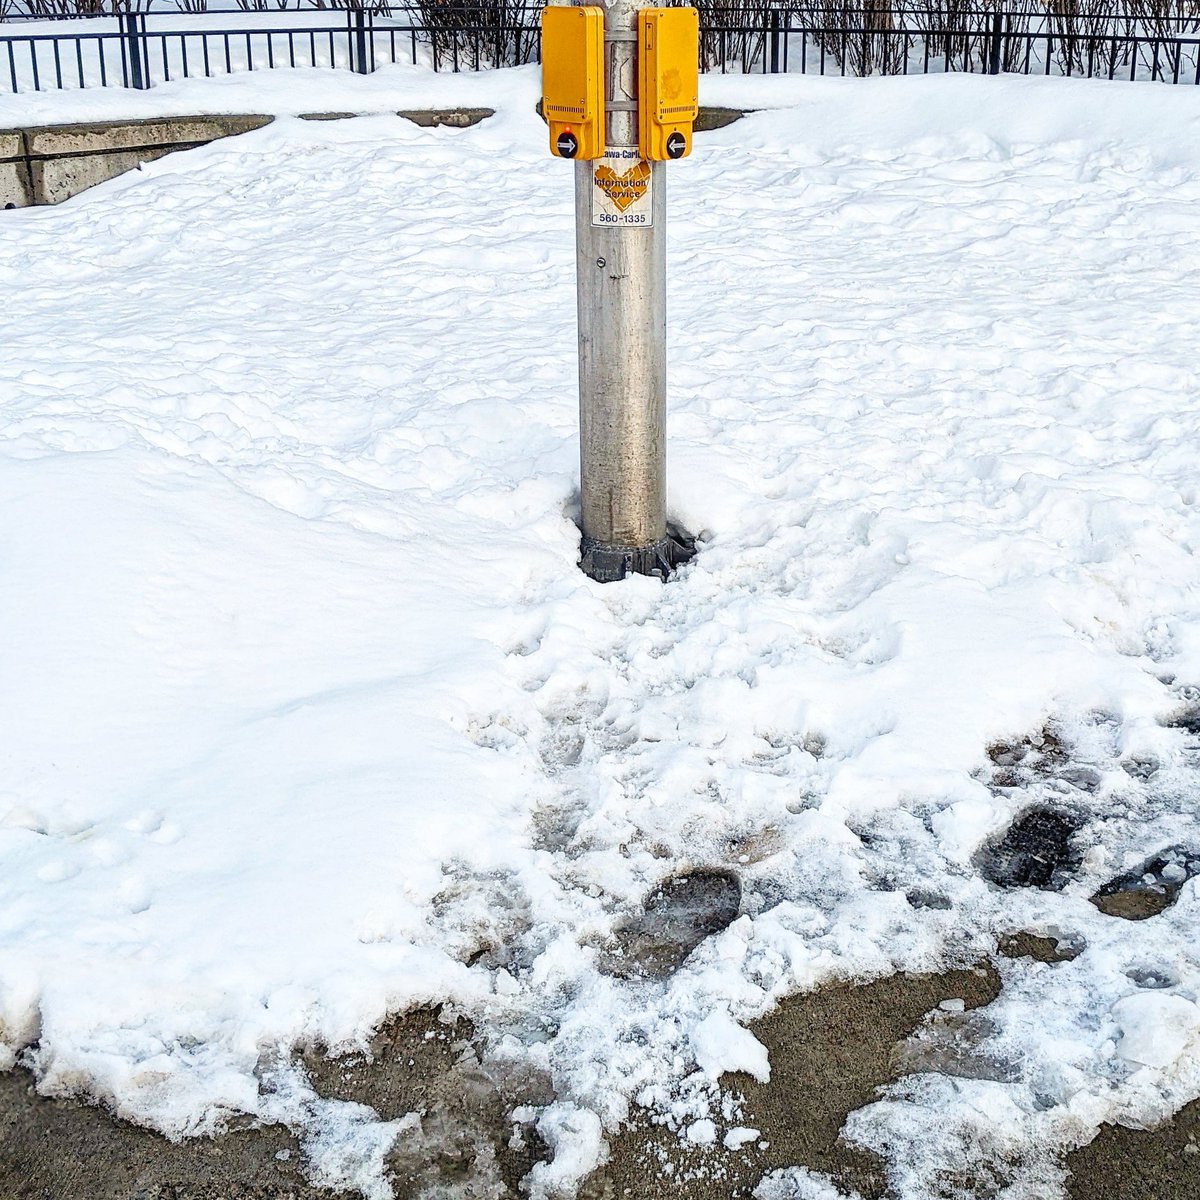 Beg buttons @ SE corner of Kent & Lisgar in downtown #Ottawa on Sunday. Snow + ice build up = impossible to reach for anyone using mobility device. I am able bodied & nearly slipped.

#downtownottawa #centretown #ottawadowntown #ottawacentretown #ottwalk #ottroll #mobility